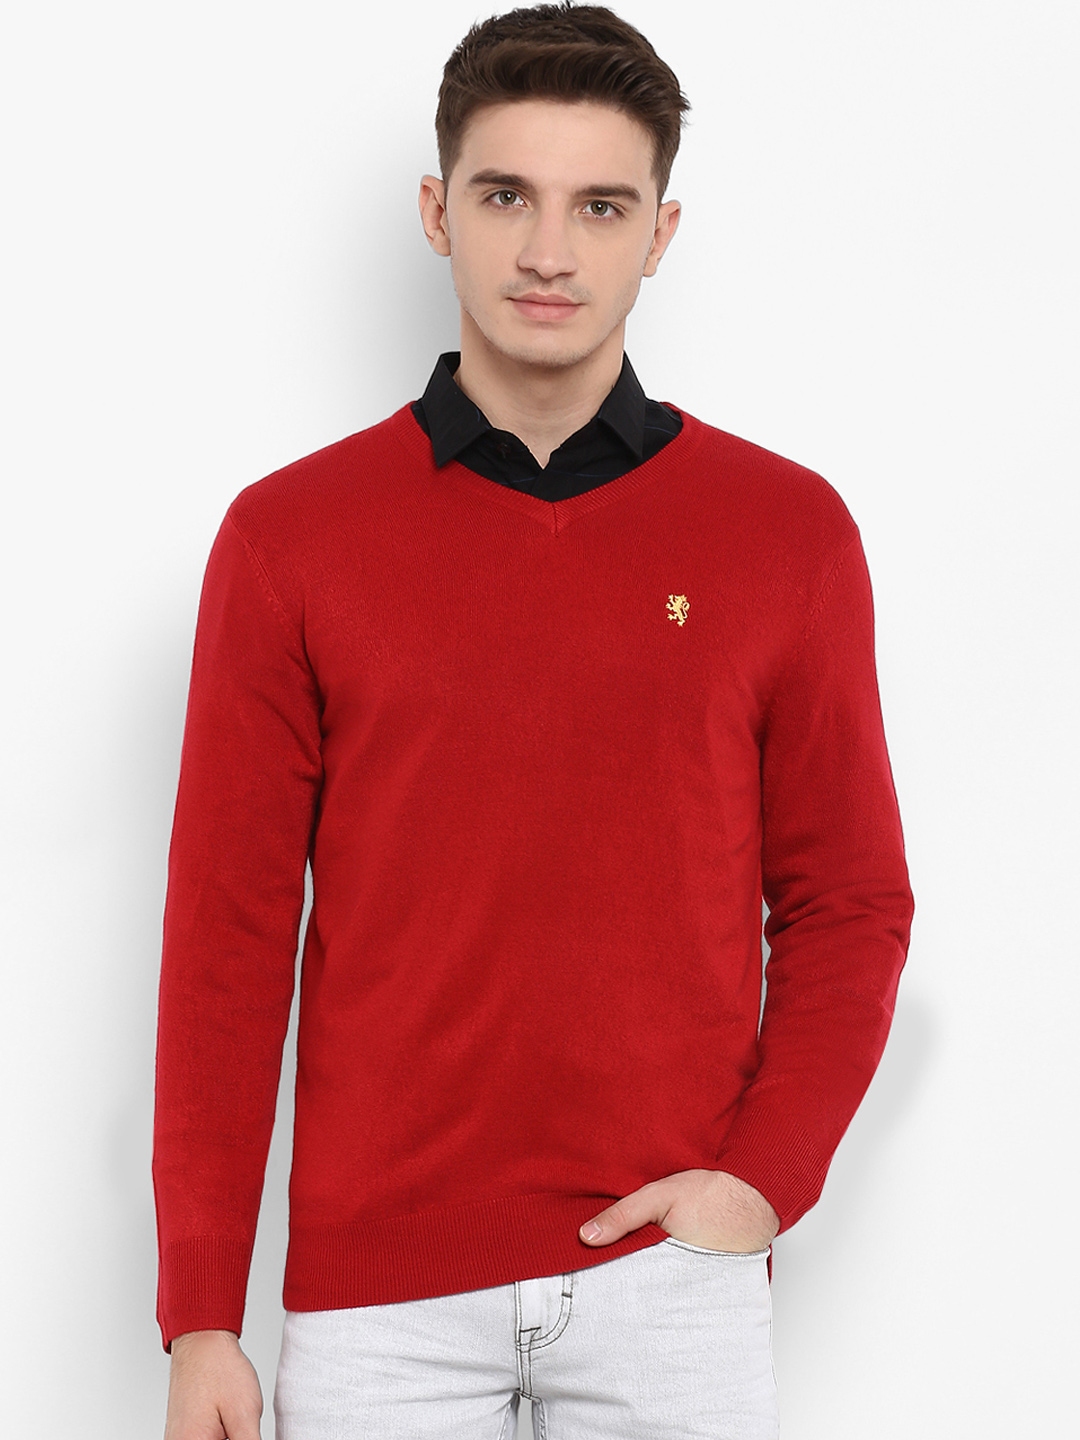 red button up sweater mens